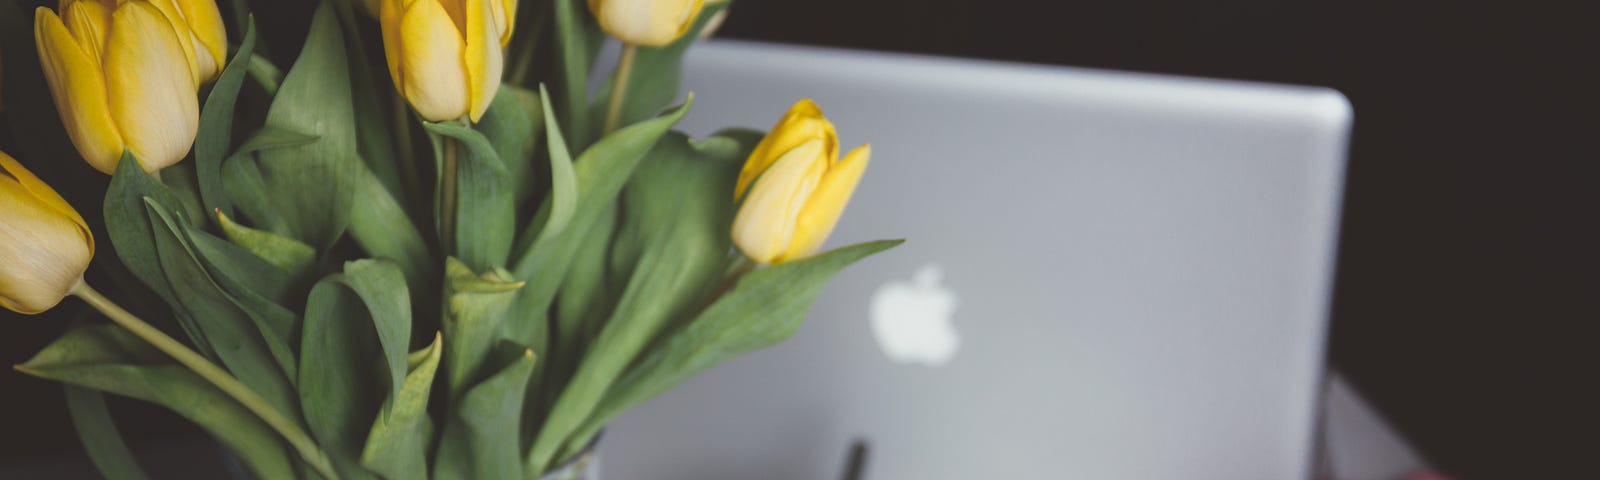 Yellow tulips on desk, next to laptop, mobile phone and coffee cup